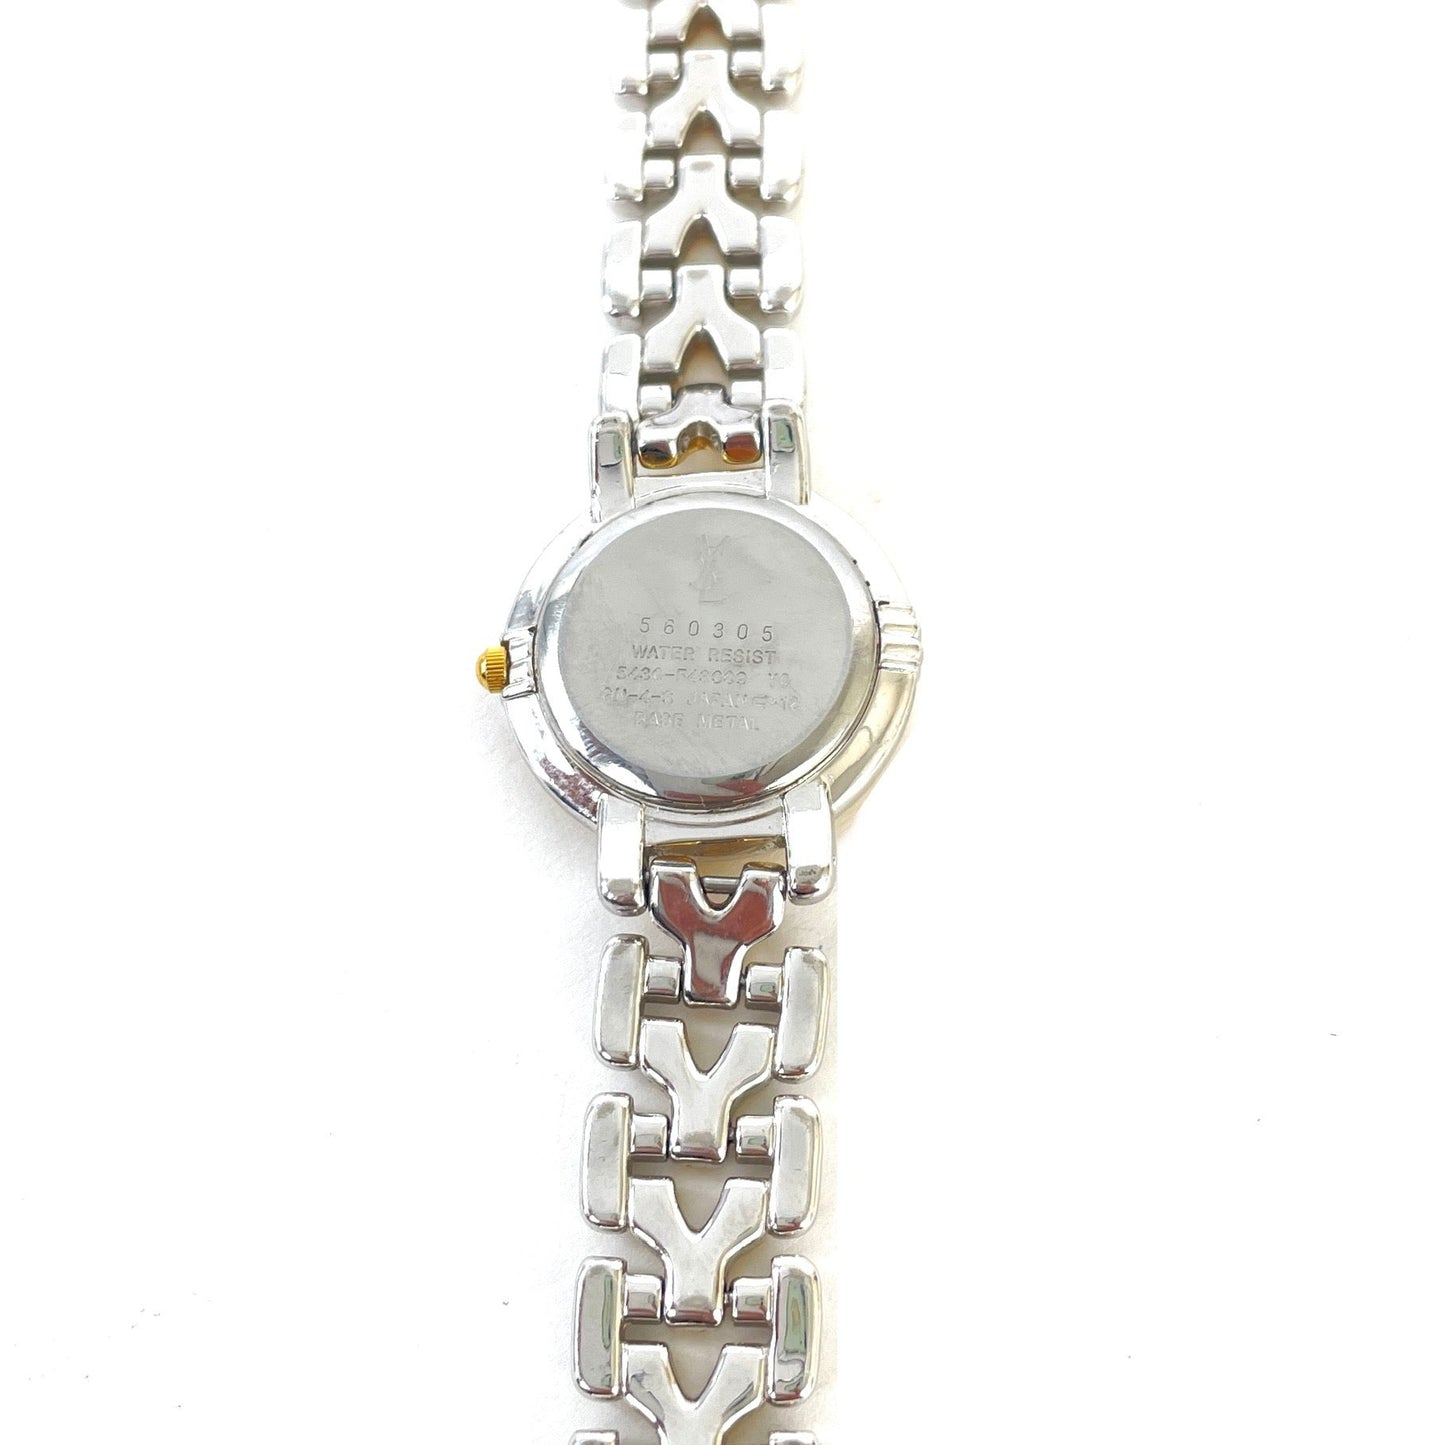 Yves Saint Laurent Watch Silver Old Vintage Accessory YSL dyvprc